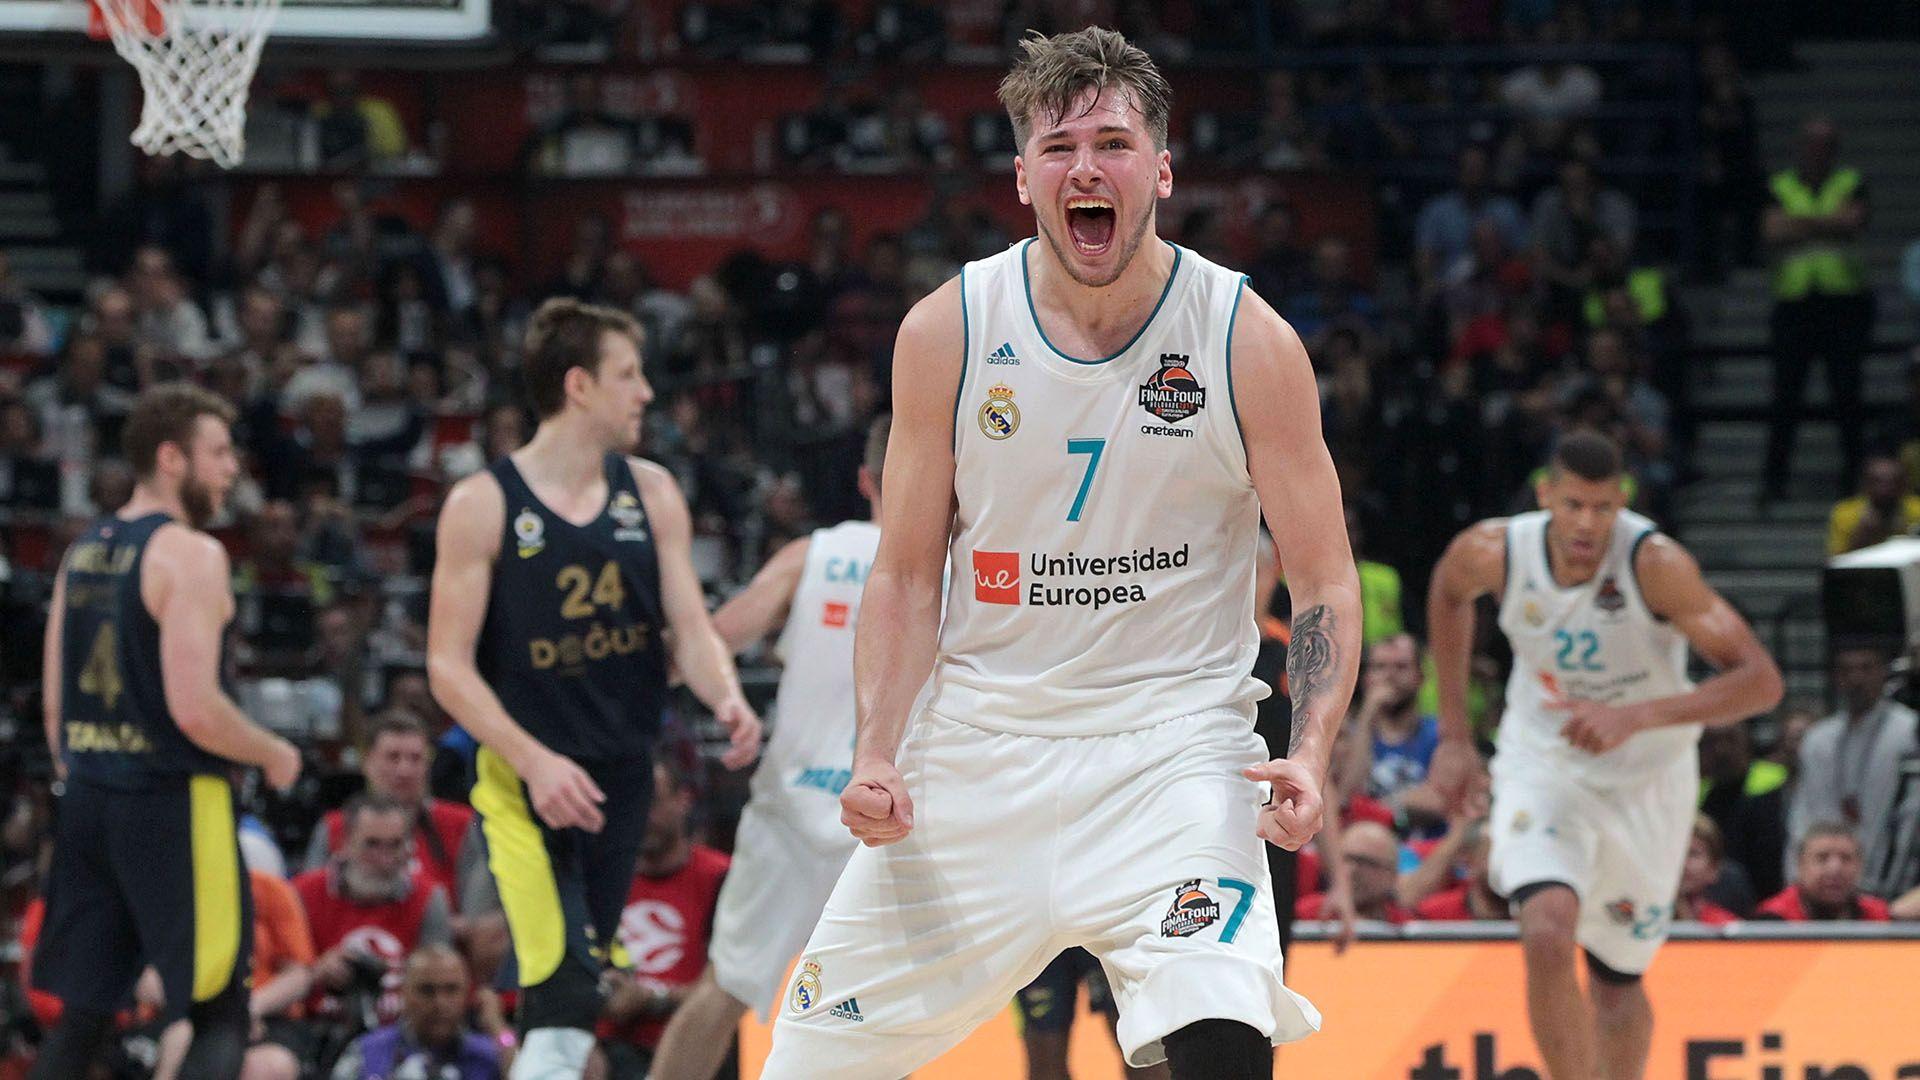 Prospect profile: Get to know Slovenian star Luka Doncic